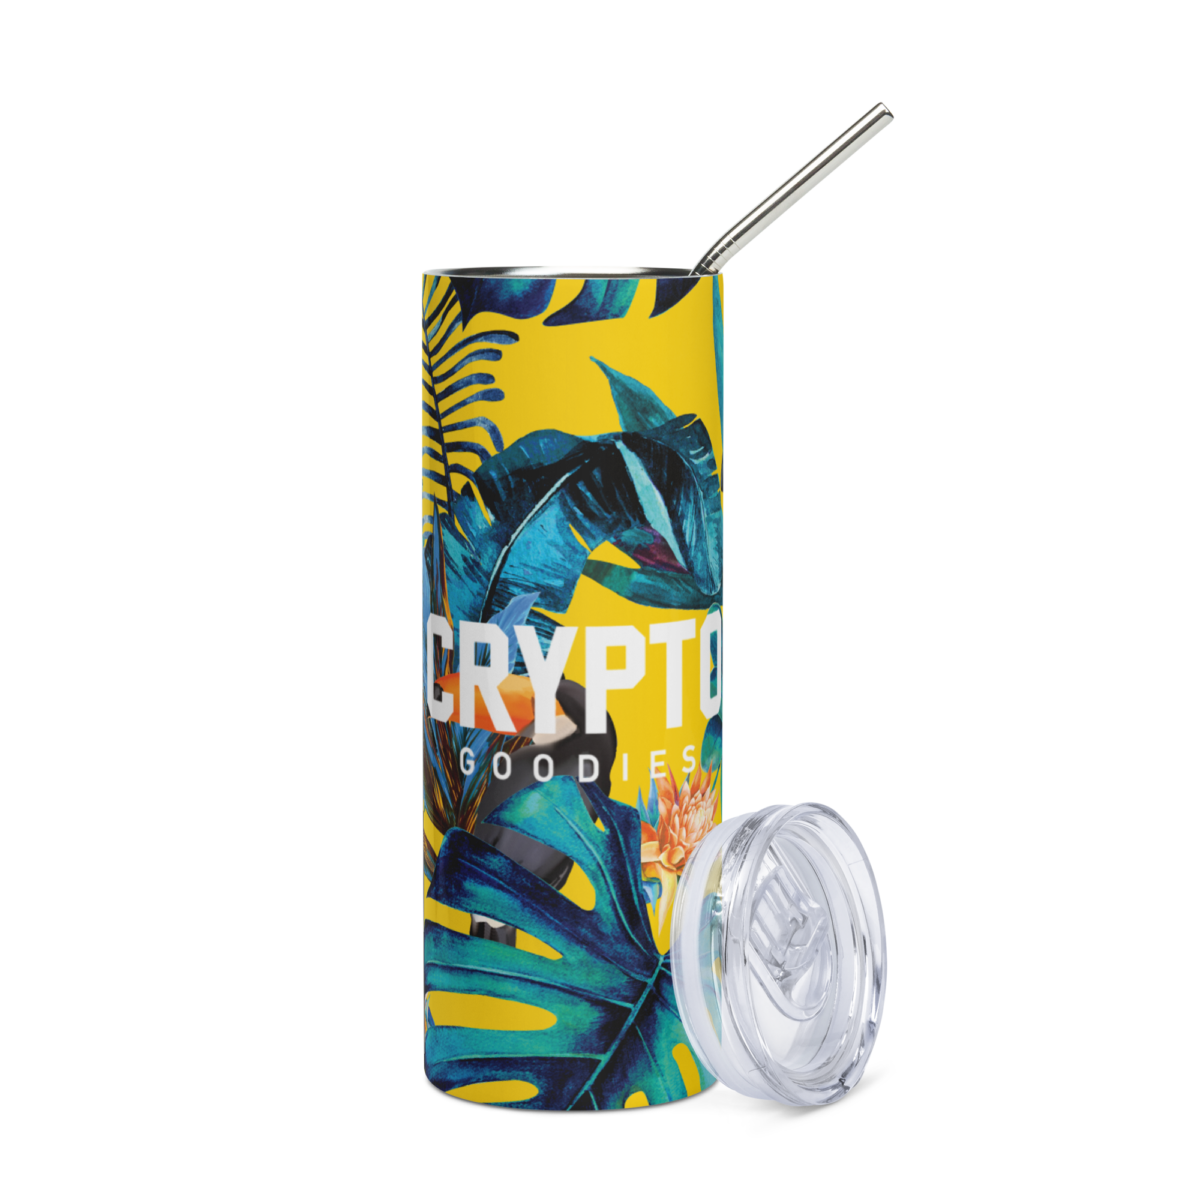 stainless steel tumbler black front 630eb6528bb8f - Crypto Goodies Tropical Stainless Steel Tumbler